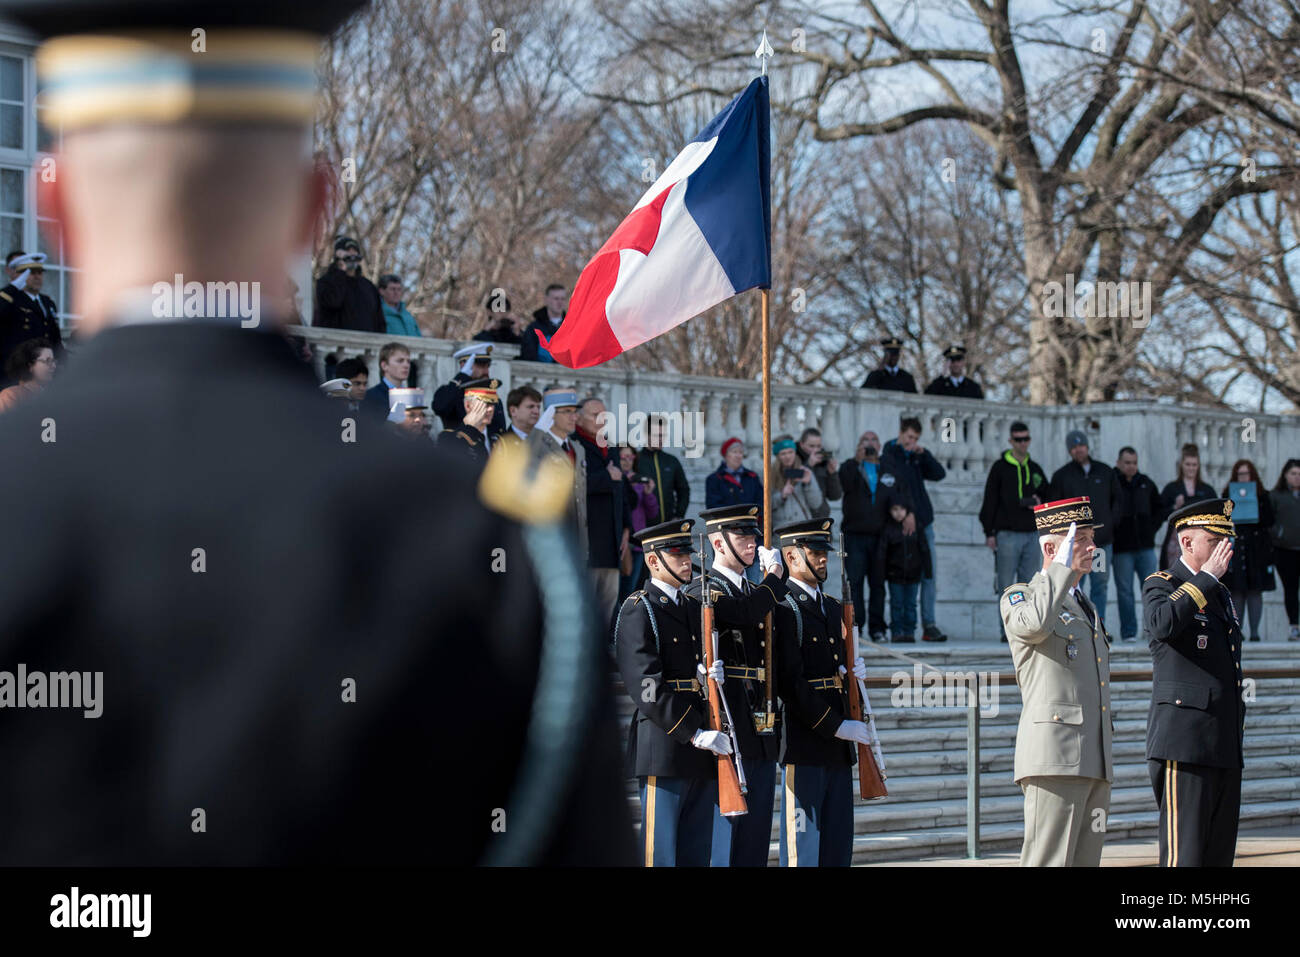 Gen. François Lecointre (second to right), chief of the defence staff, French Armed Forces; and Maj. Gen. John P. Sullivan (far right), assistant deputy chief of staff, G-4; render honors during an Armed Forces Full Honors Wreath-Laying Ceremony at the Tomb of the Unknown Soldier at Arlington National Cemetery, Arlington, Virginia, Feb. 12, 2018. Lecointre visited ANC as part of his first official visit, touring the Memorial Amphitheater Display Room and meeting with ANC Senior Leadership. (U.S. Army Stock Photo